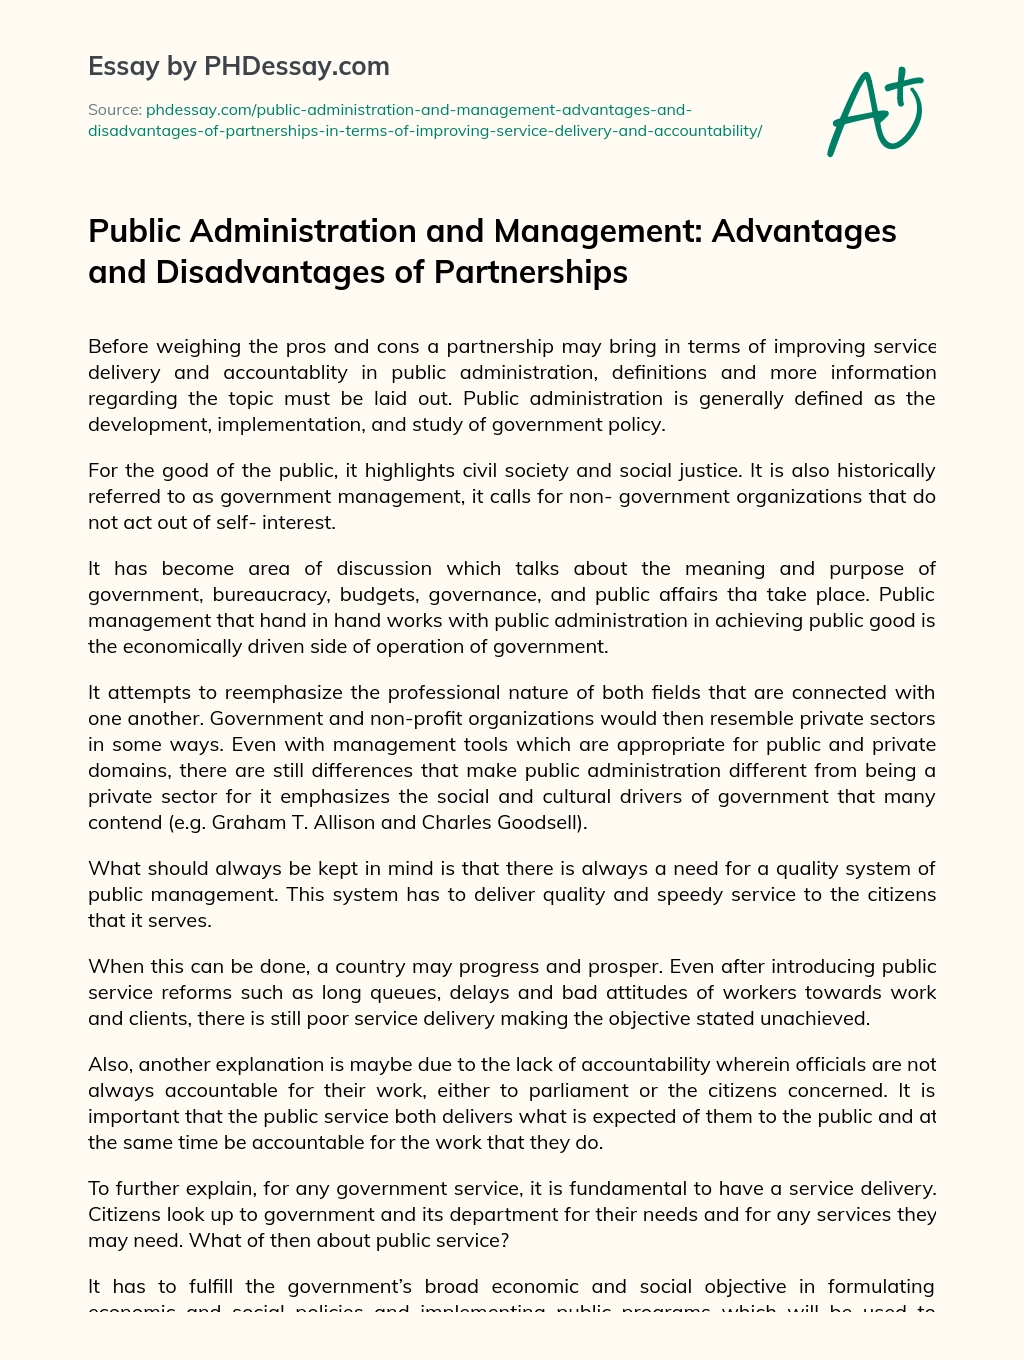 Public Administration and Management: Advantages and Disadvantages of Partnerships essay